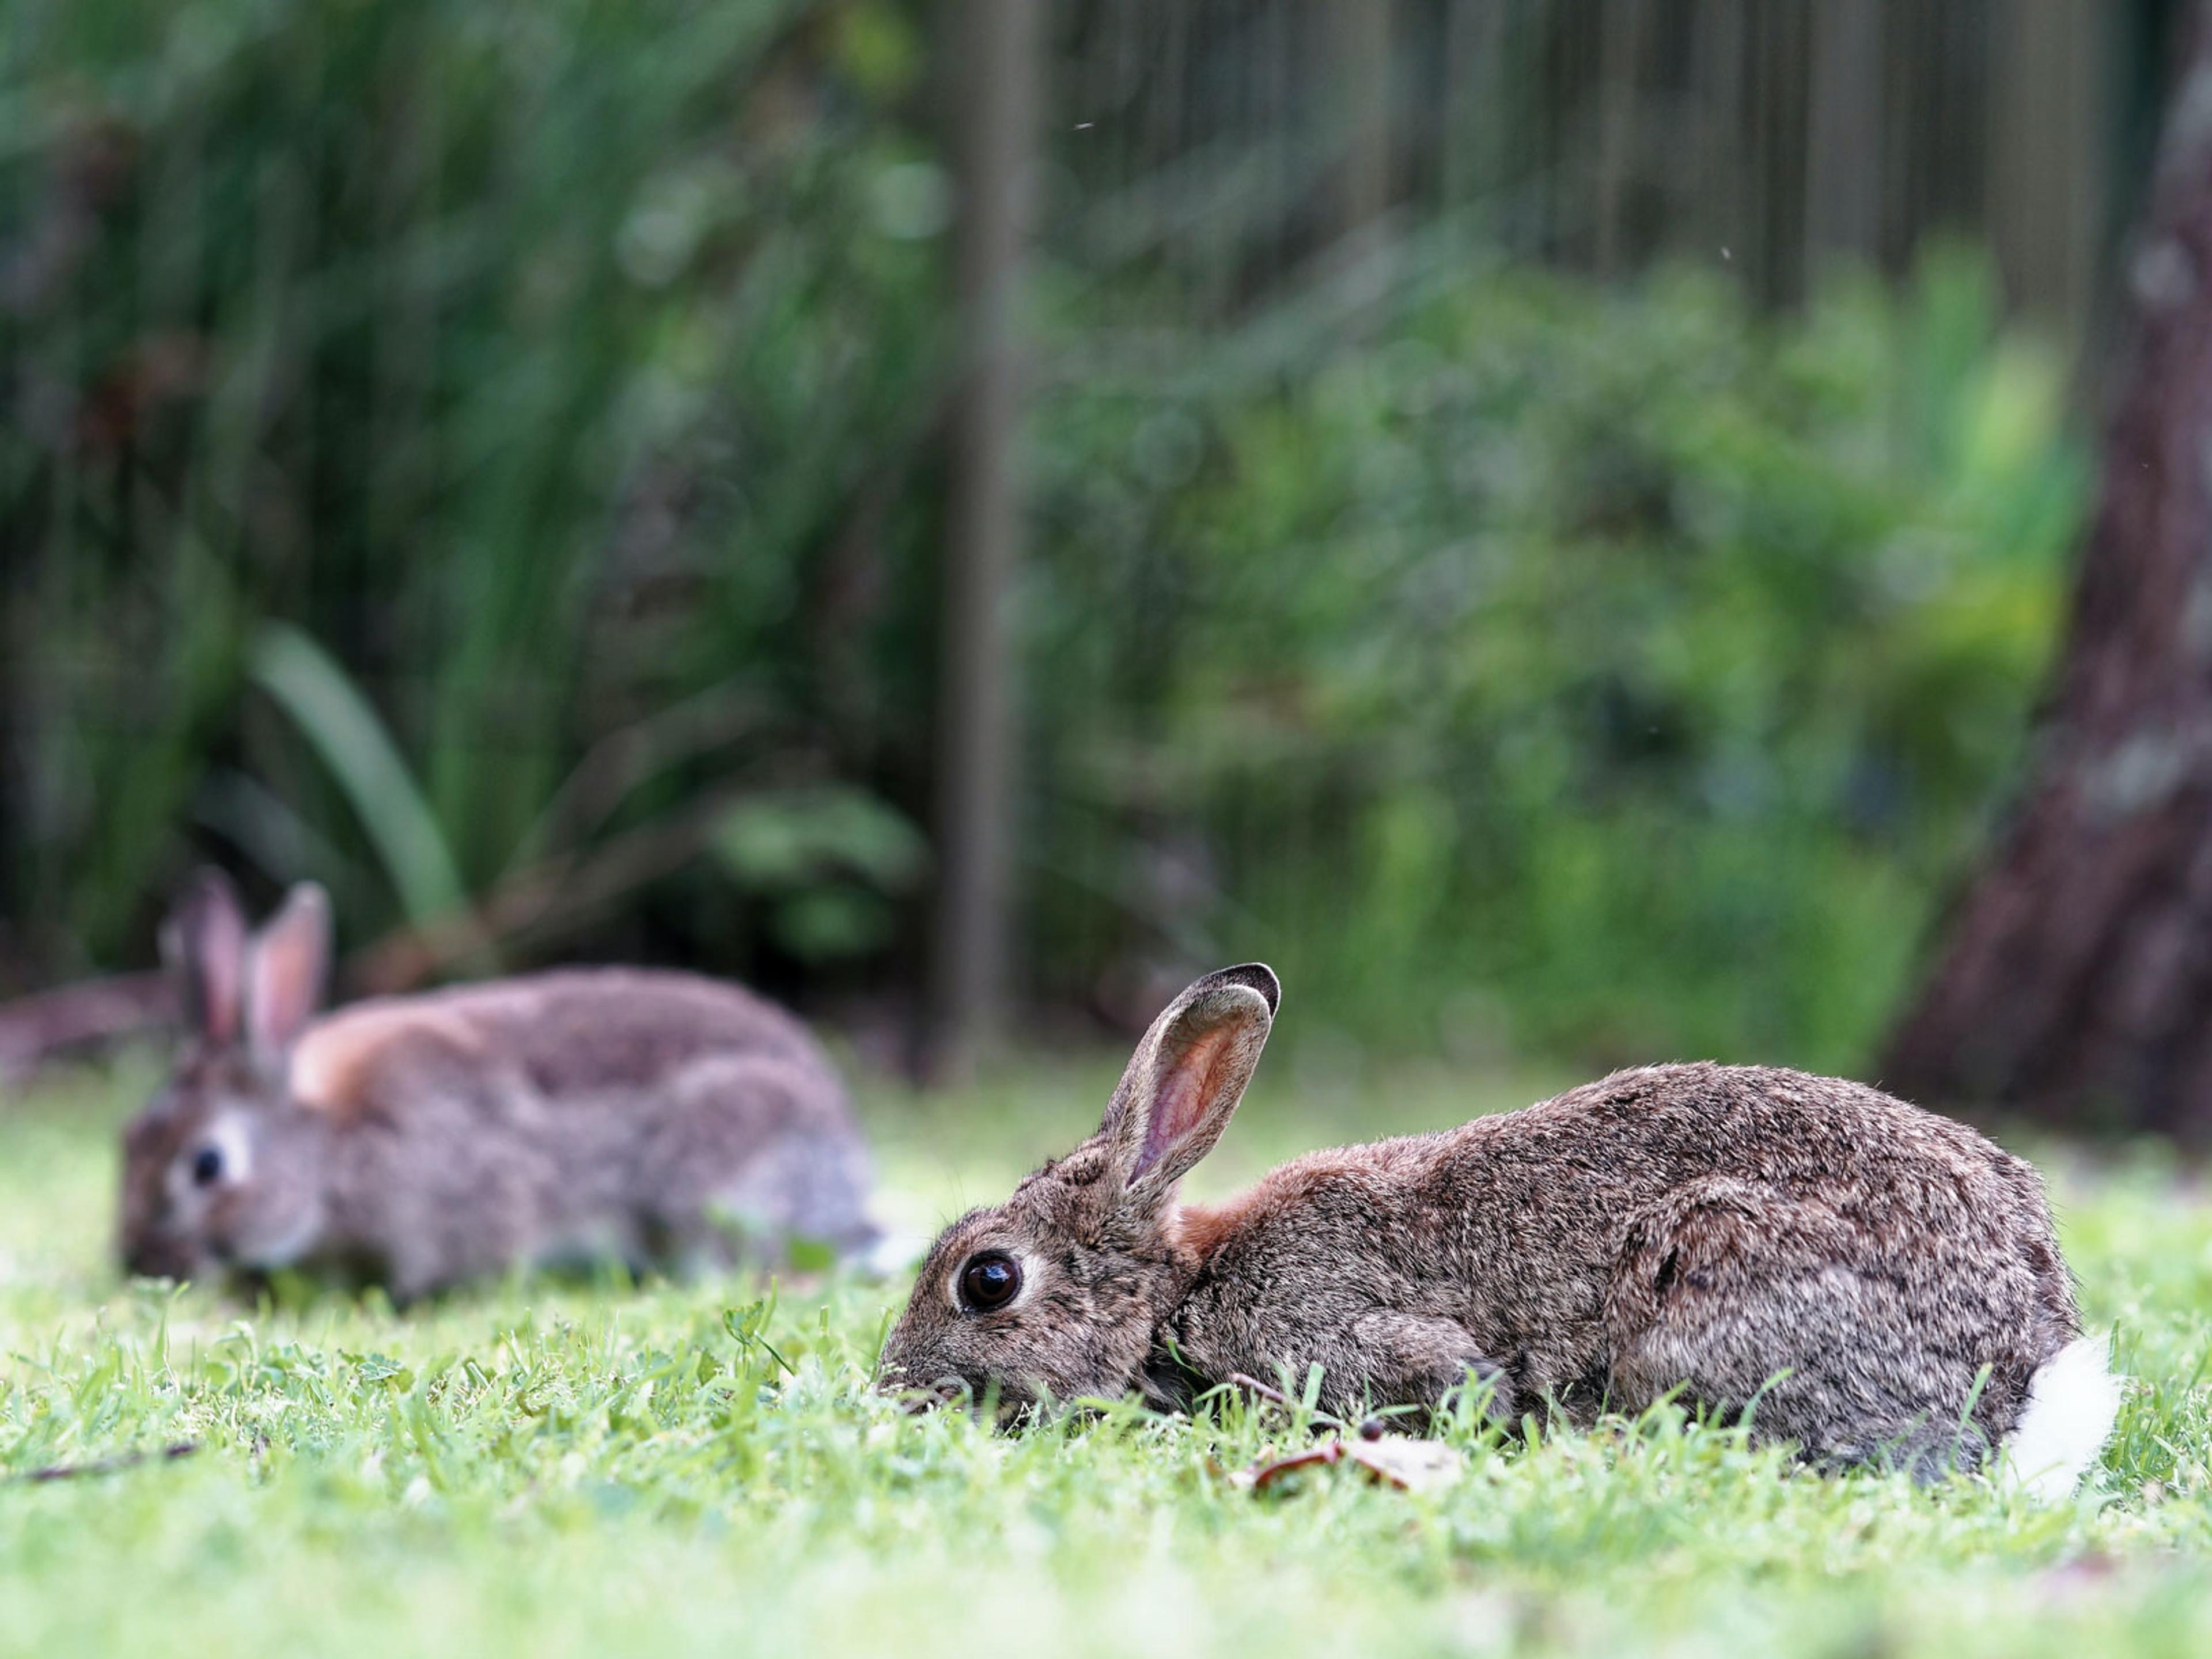 Two rabbits grazing in a field with a forest behind them.